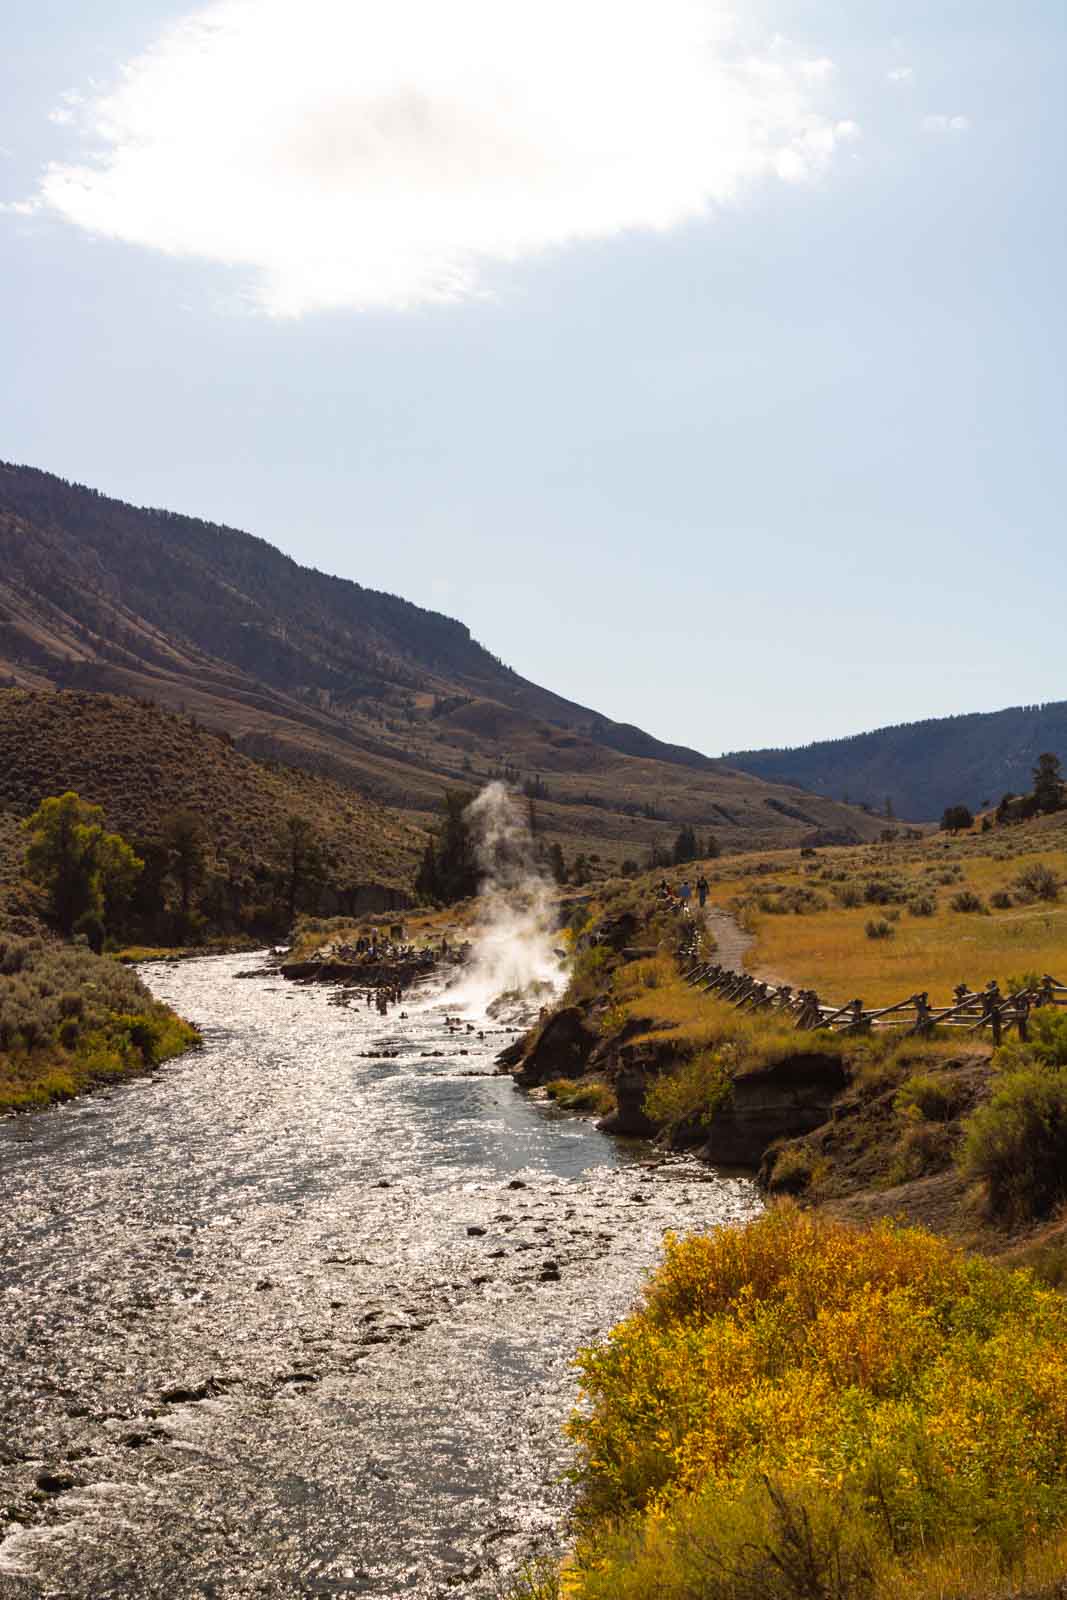 A view of Boiling River which is a must for any Yellowstone Itinerary